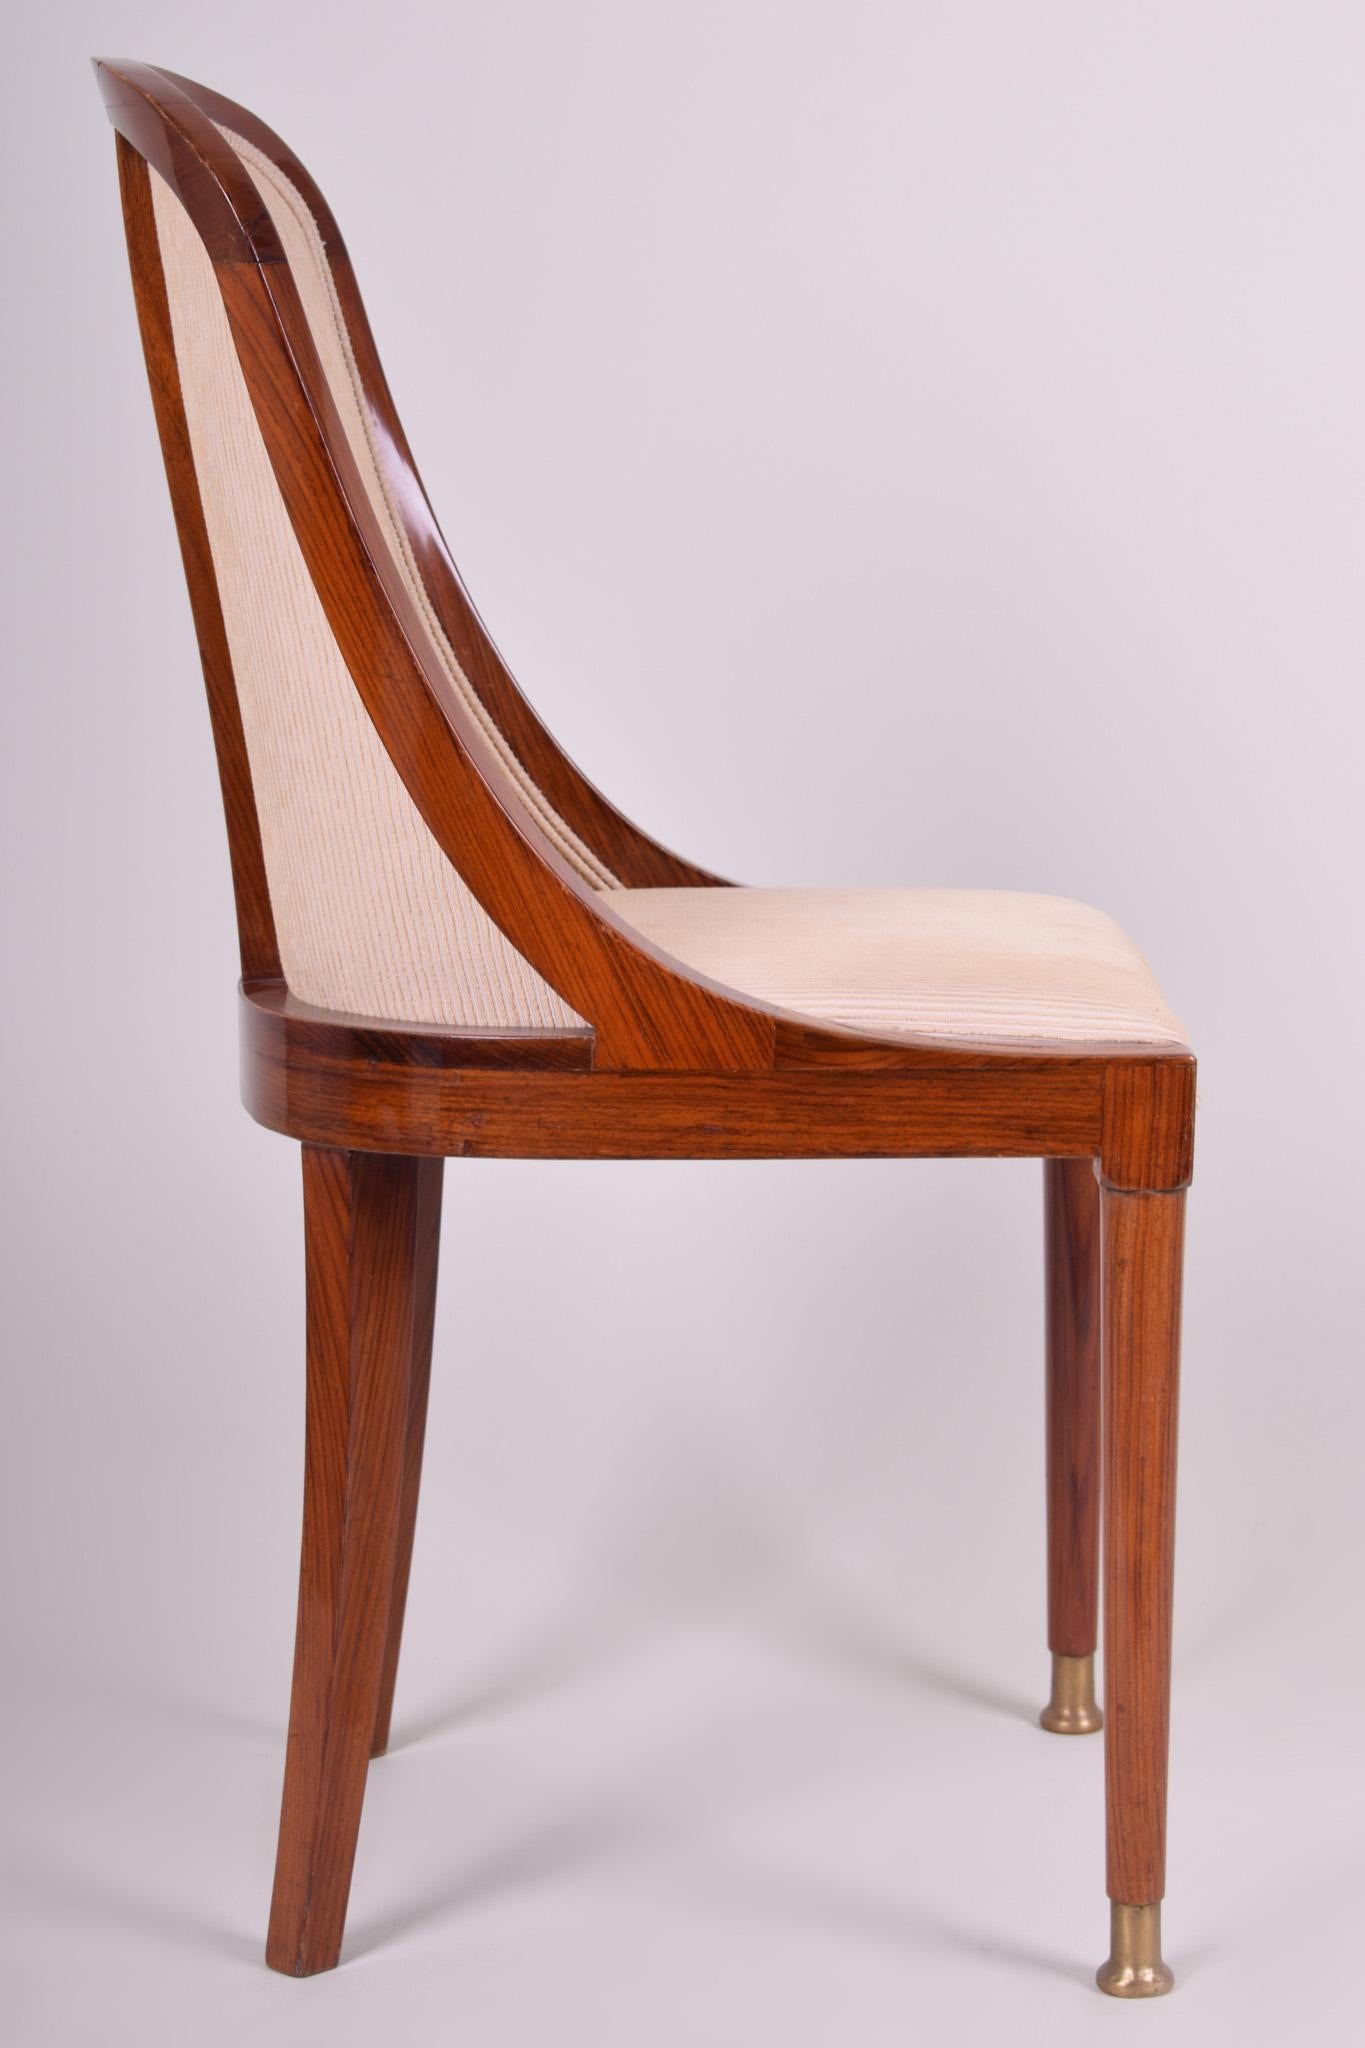 Art Deco Unique Palisander Artdeco Chair from Czechia, 1920-1929 Restored, New Upholstery